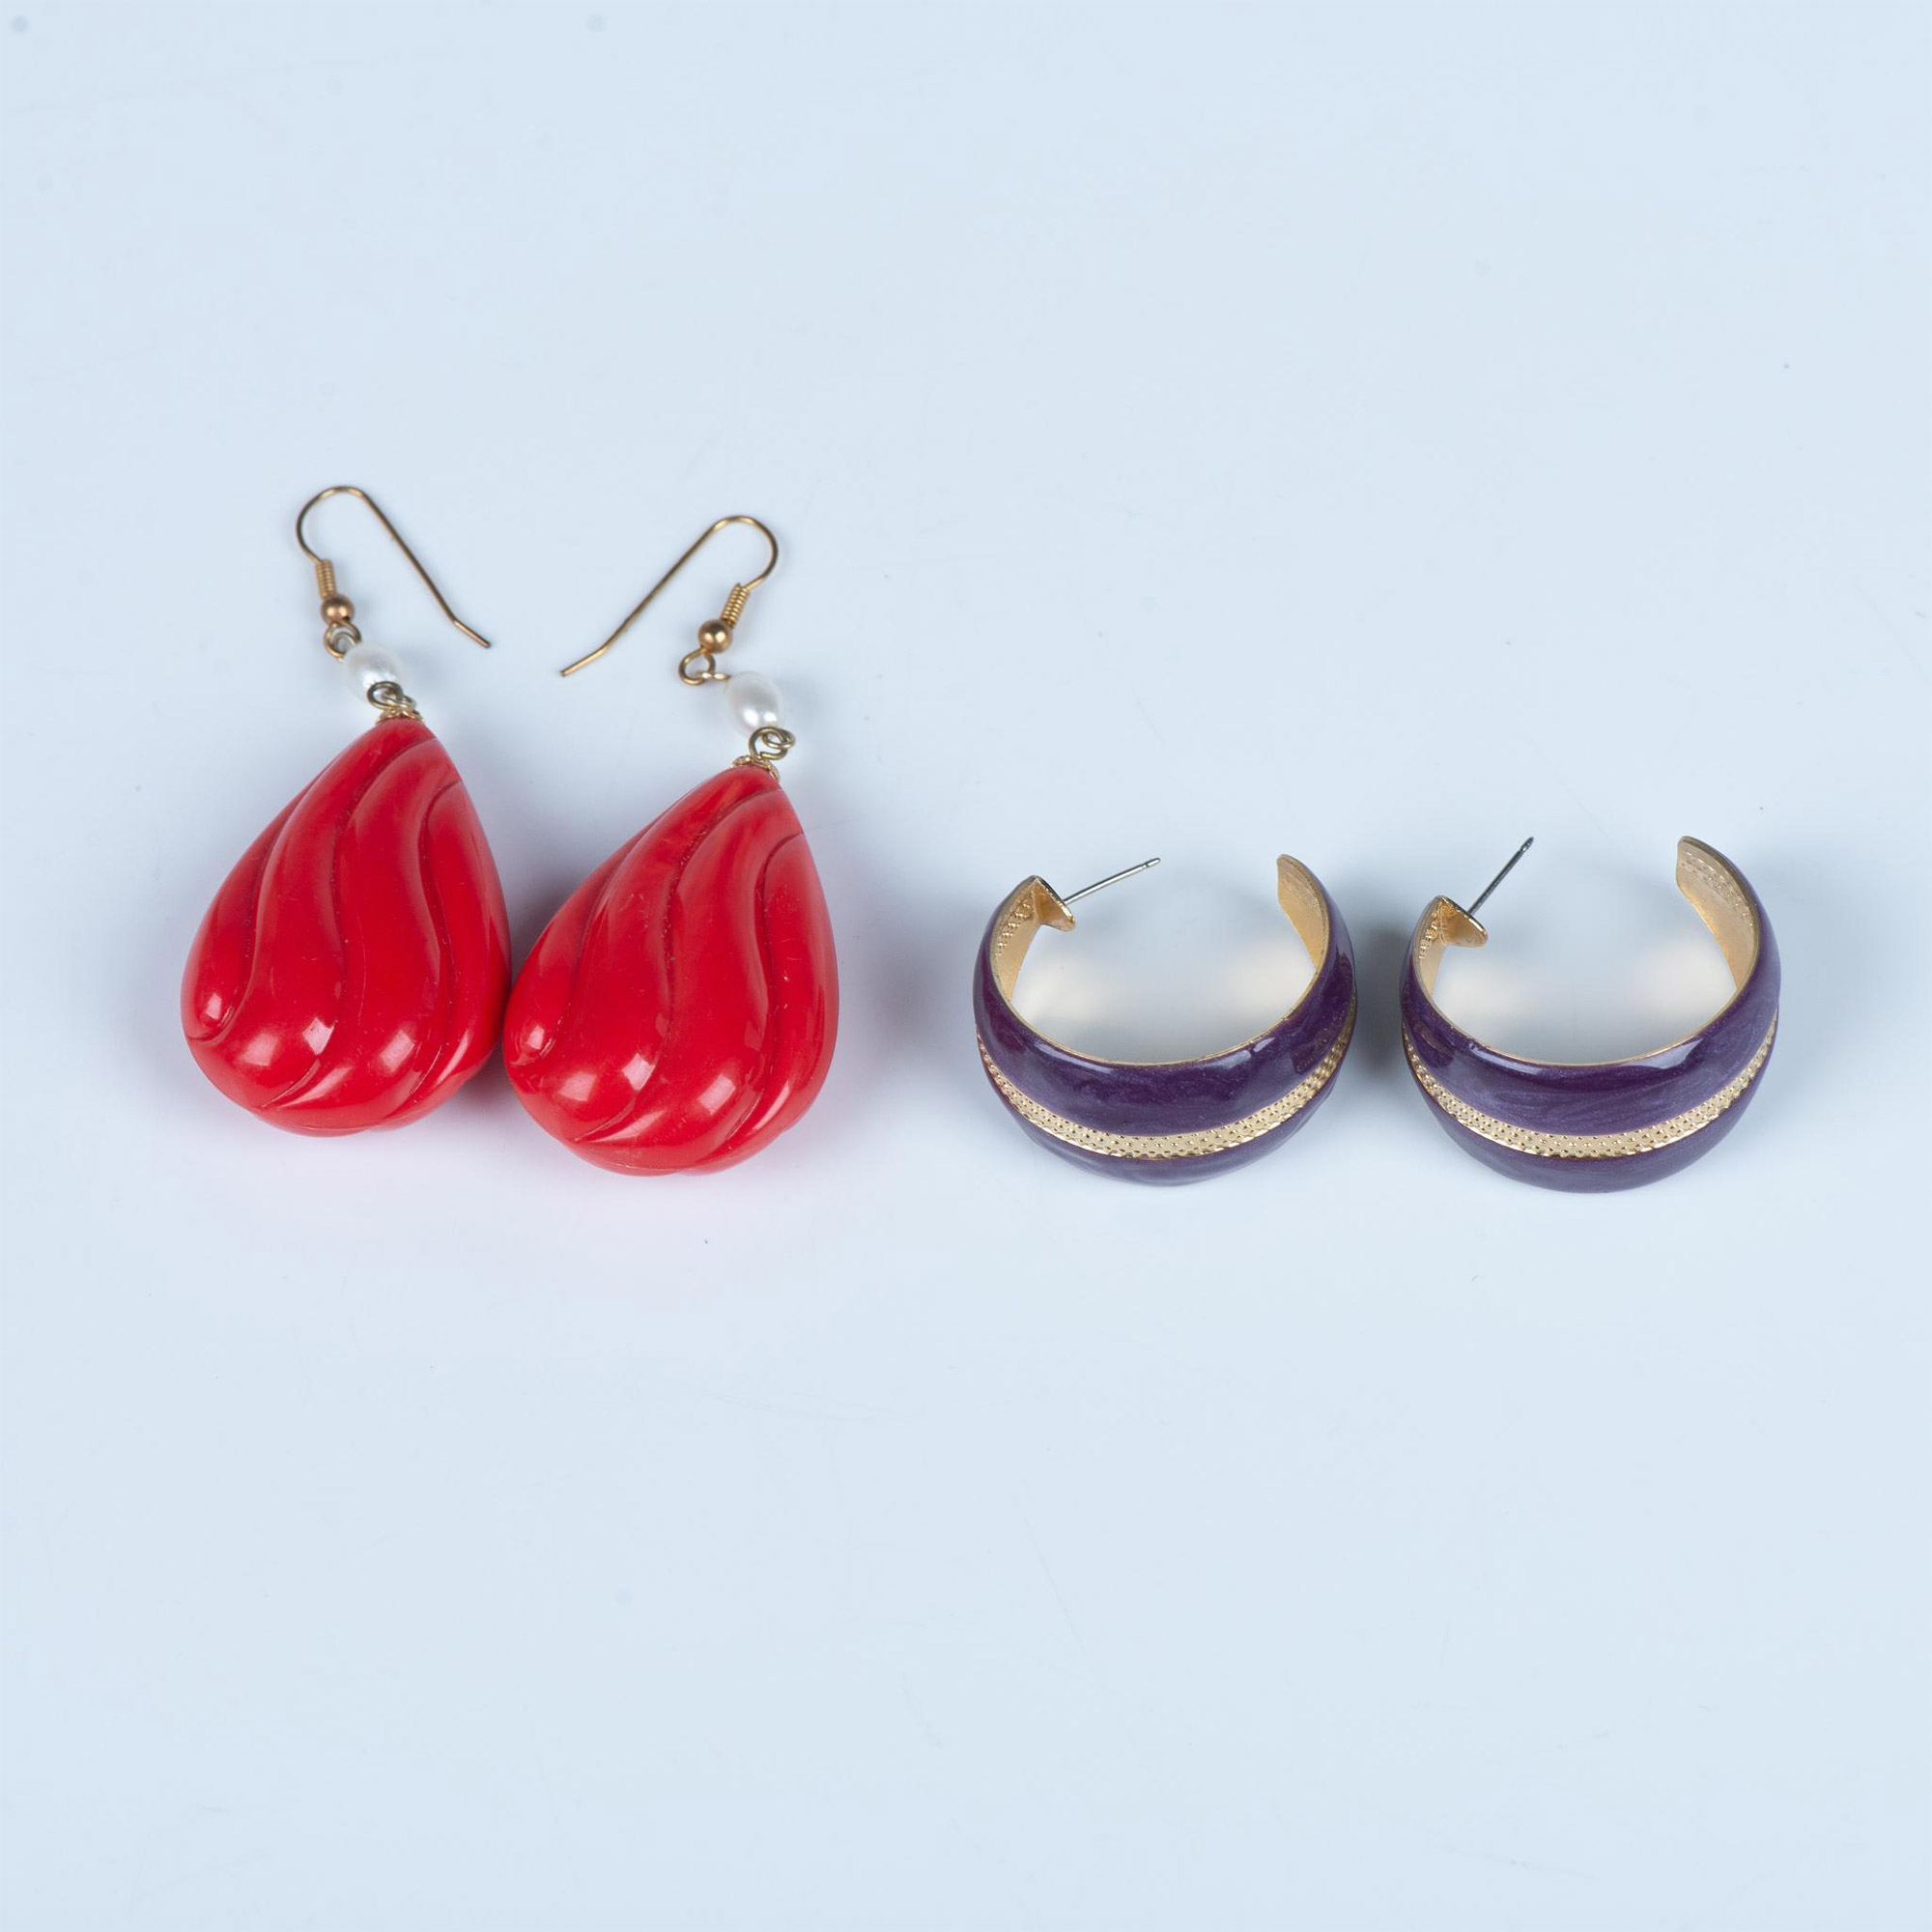 2 Pairs of Large Bold Colorful Costume Pierced Earrings - Image 2 of 3